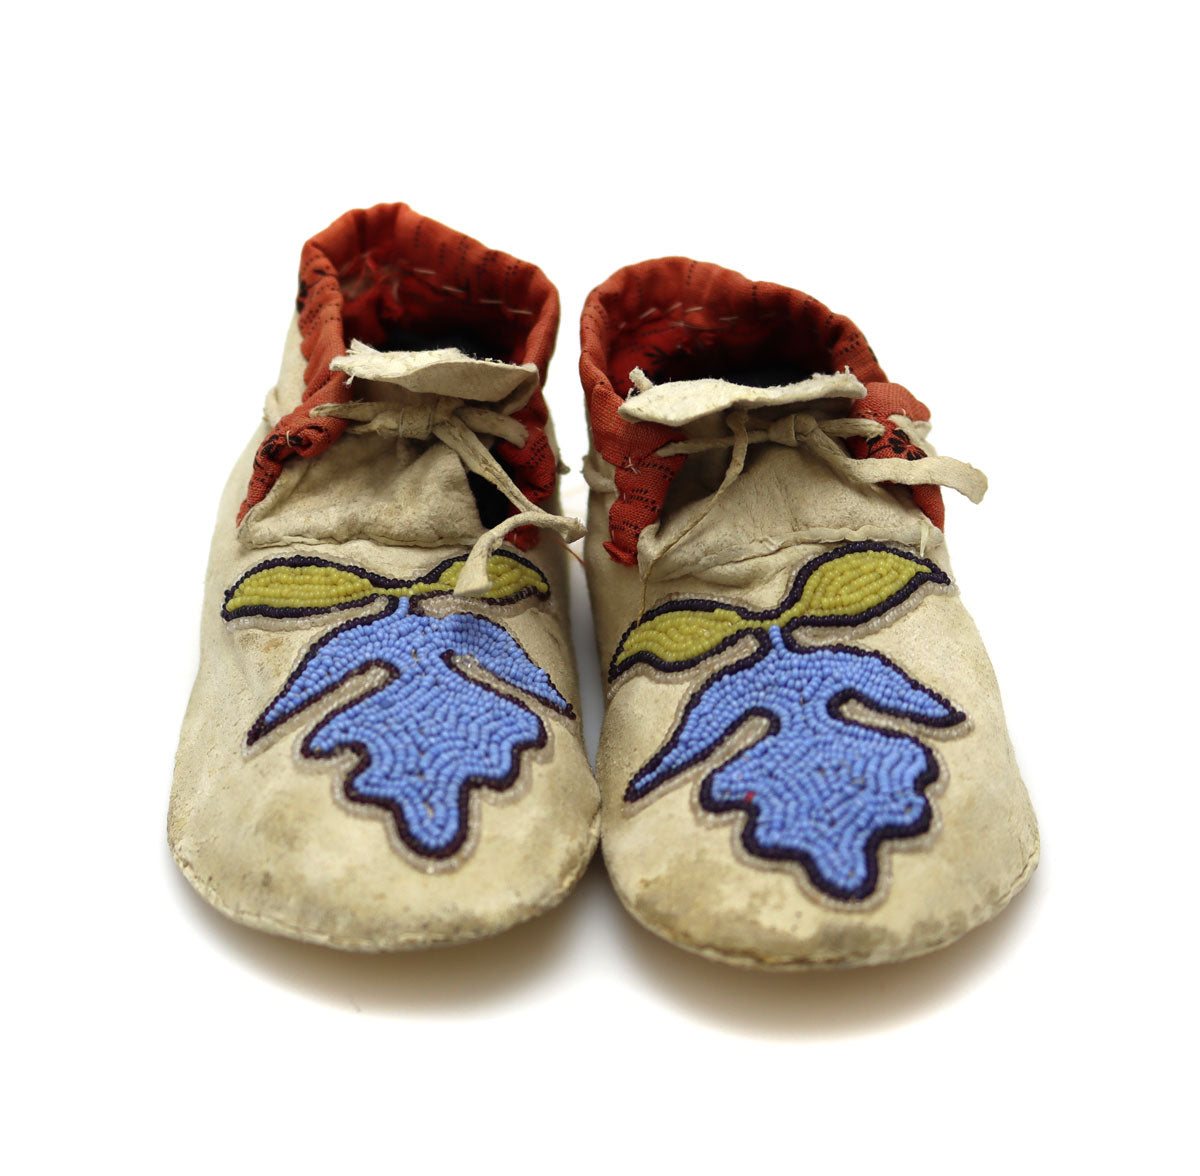 Woodlands (Sac and Fox) Leather Beaded Moccasins with Floral Design c. 1900s, 2" x 5.25" x 2.25" (DW92323A-0421-015) 1
